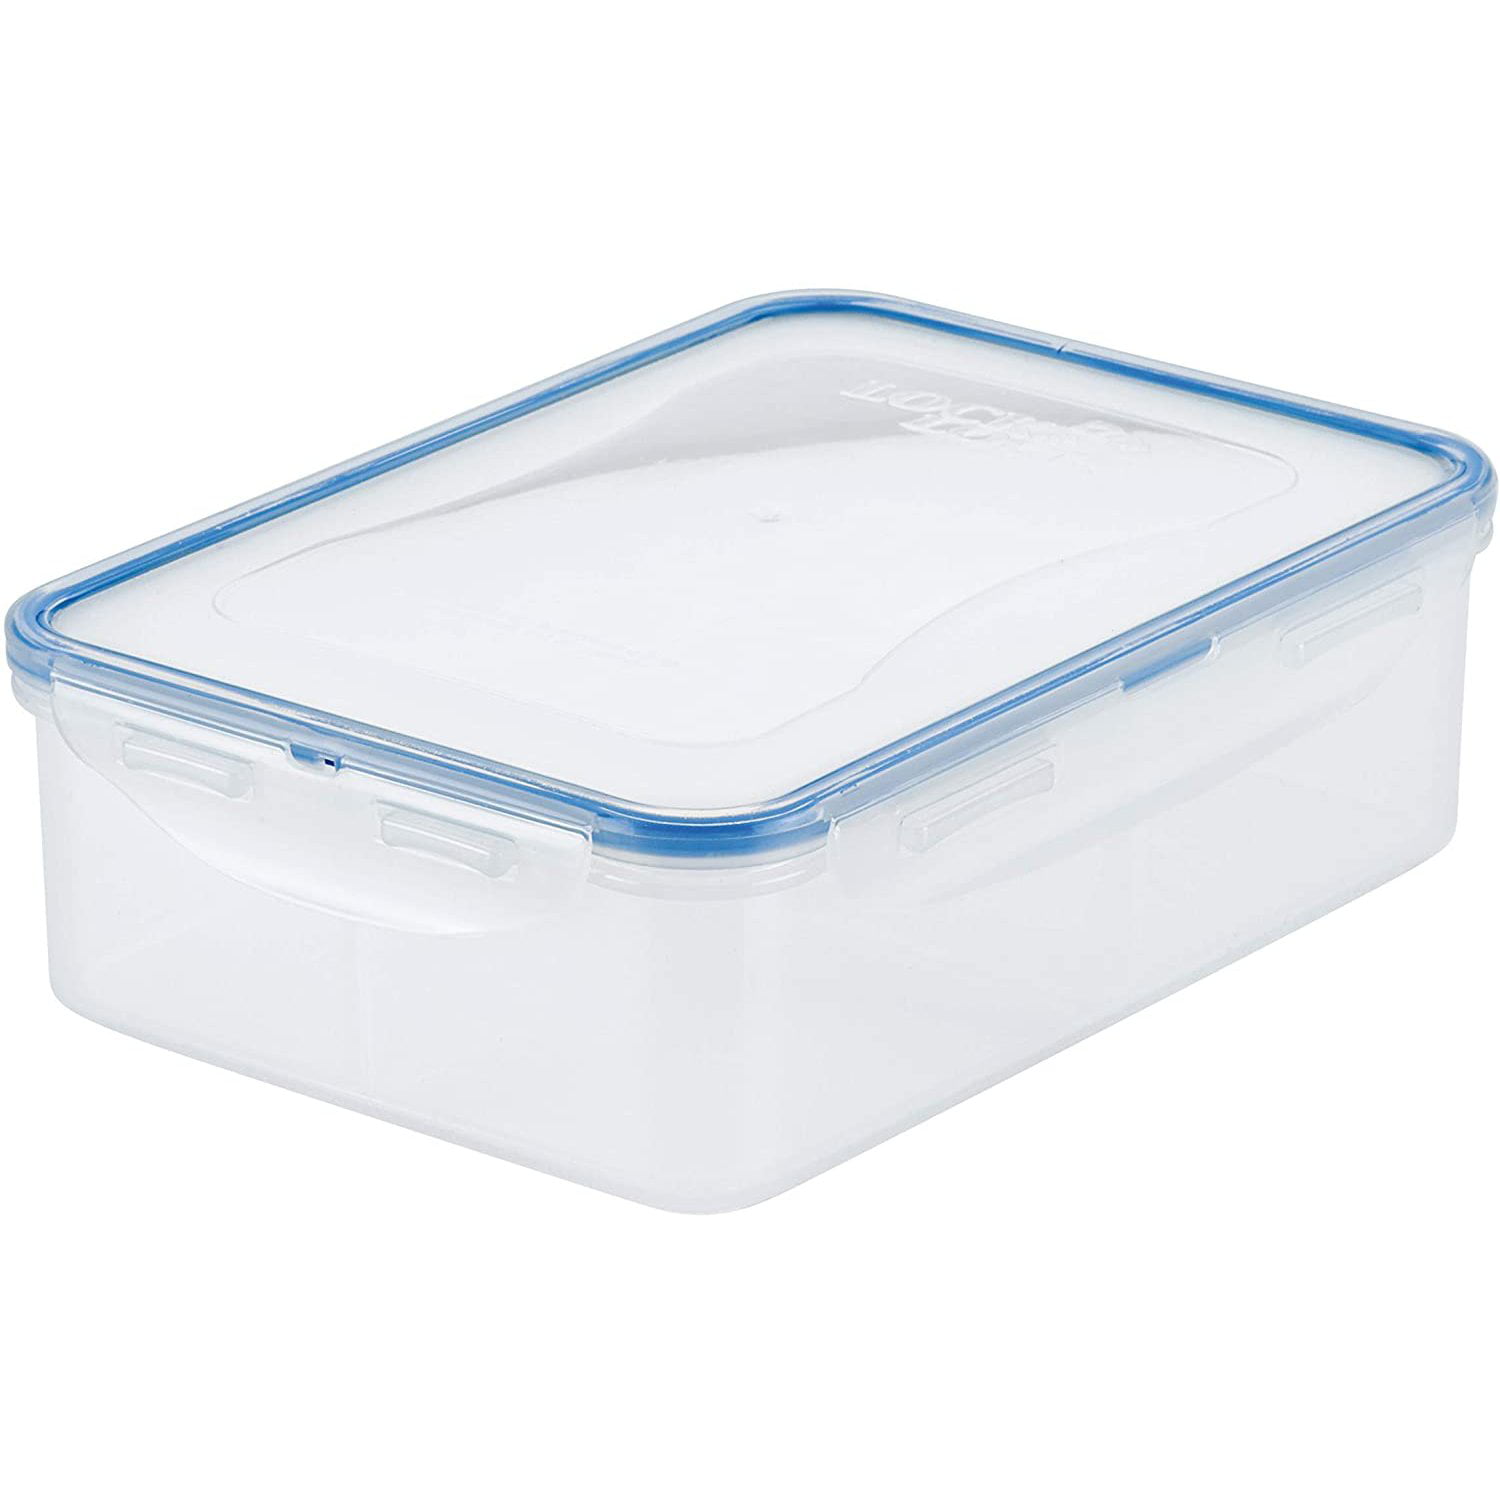 Details about   Food Containers Airtight Durable Food Storage Quality Clear Plastic Boxes Set 